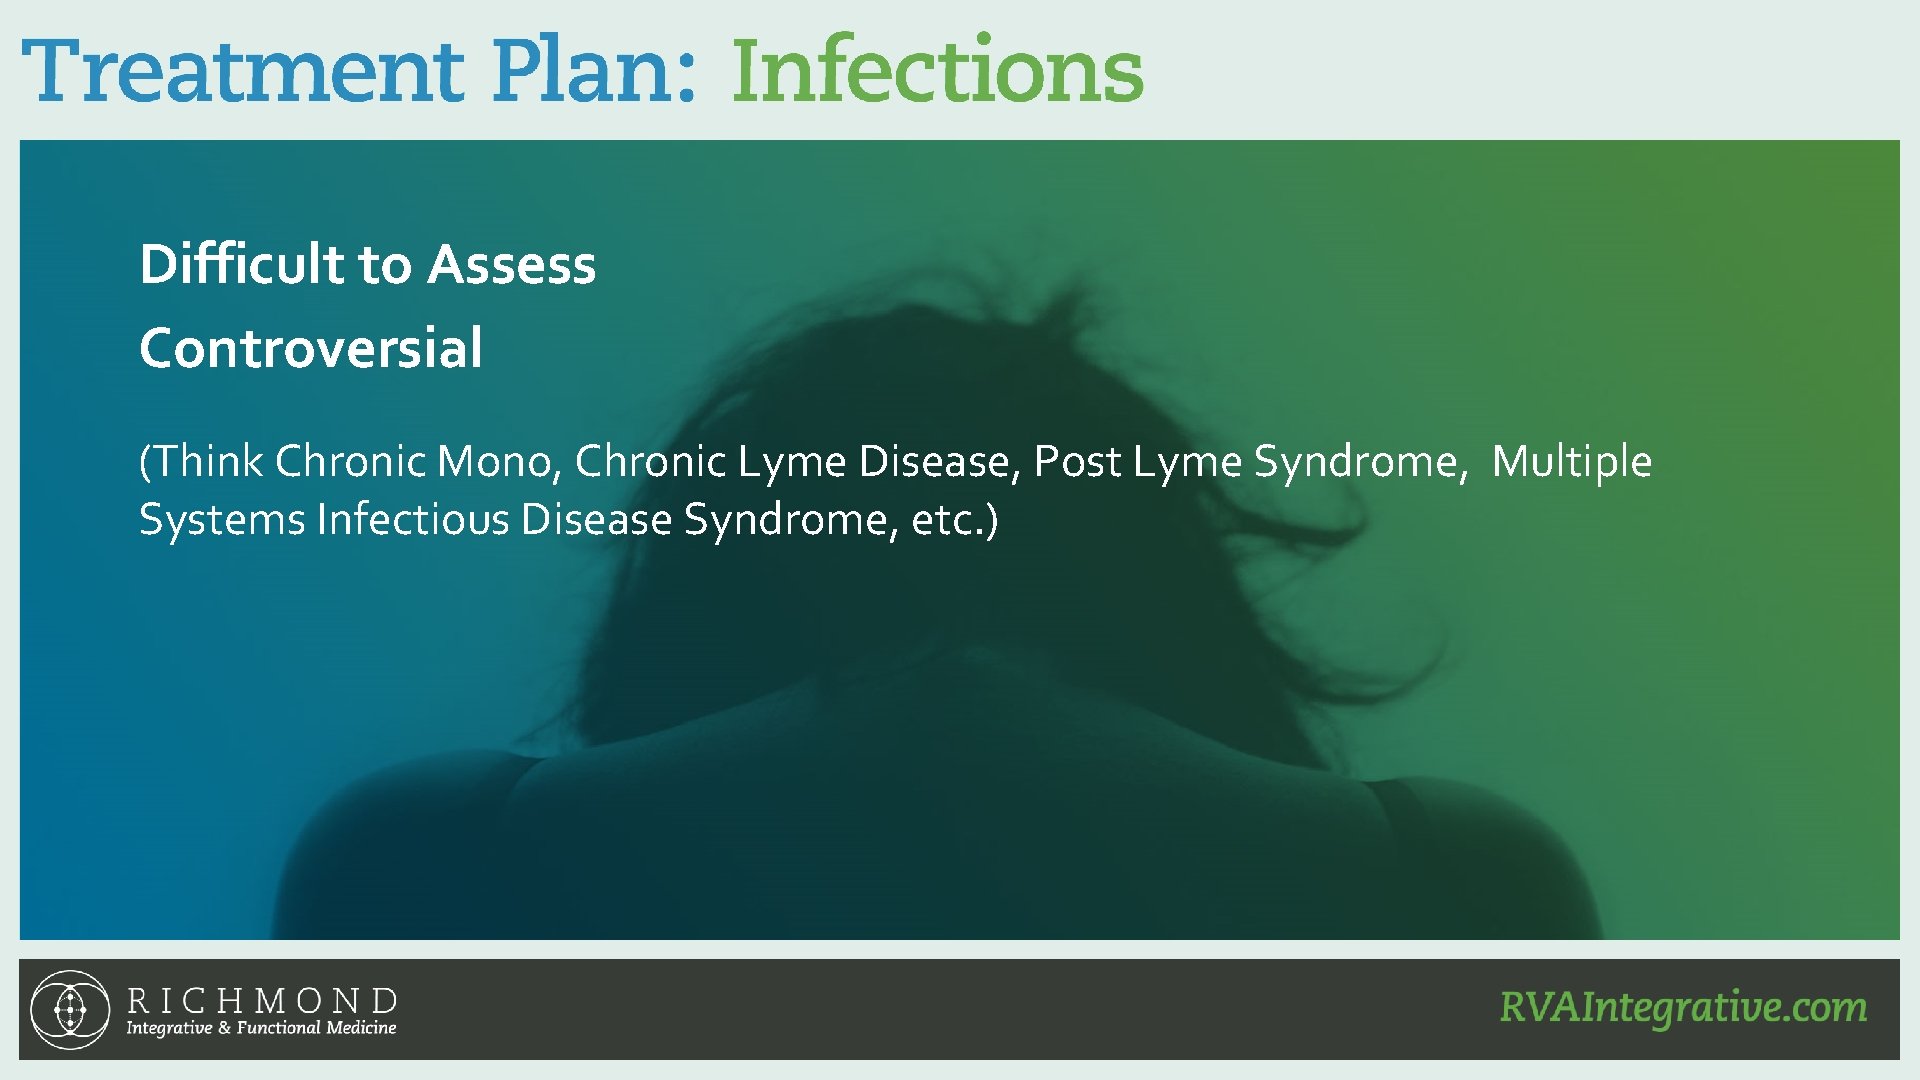 Difficult to Assess Controversial (Think Chronic Mono, Chronic Lyme Disease, Post Lyme Syndrome, Multiple